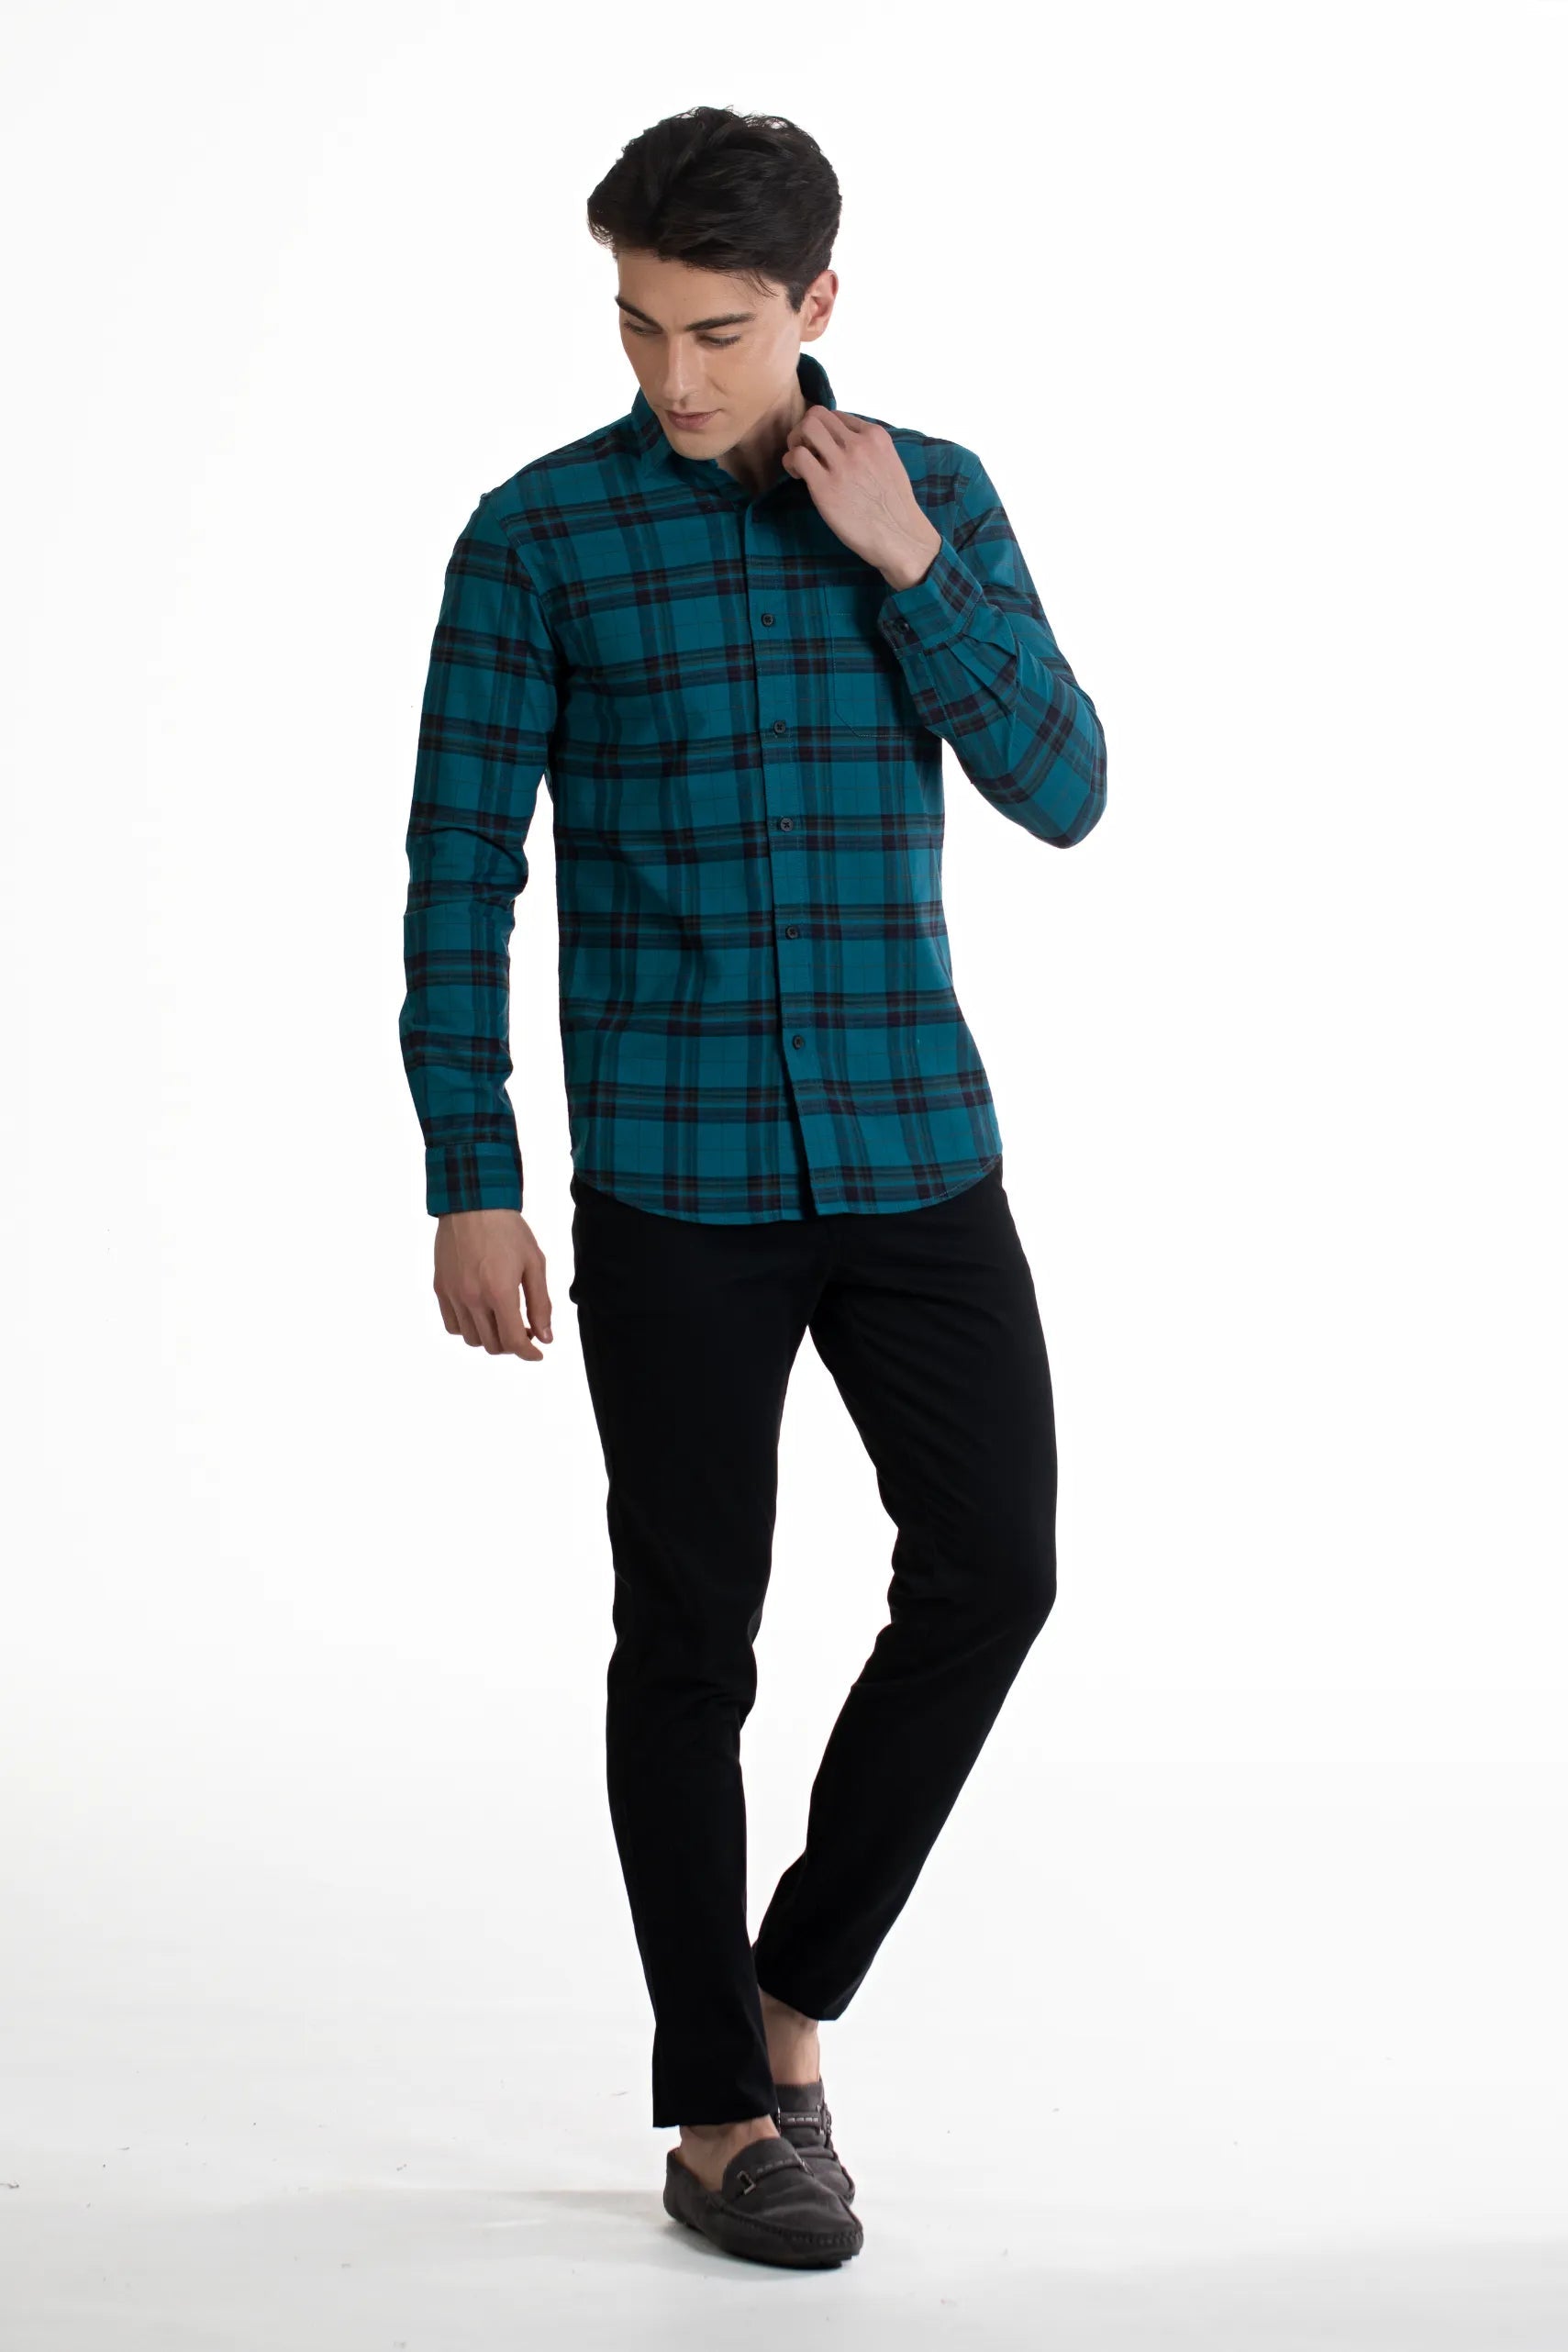 Buy Flannel Oxford Shirts Online.